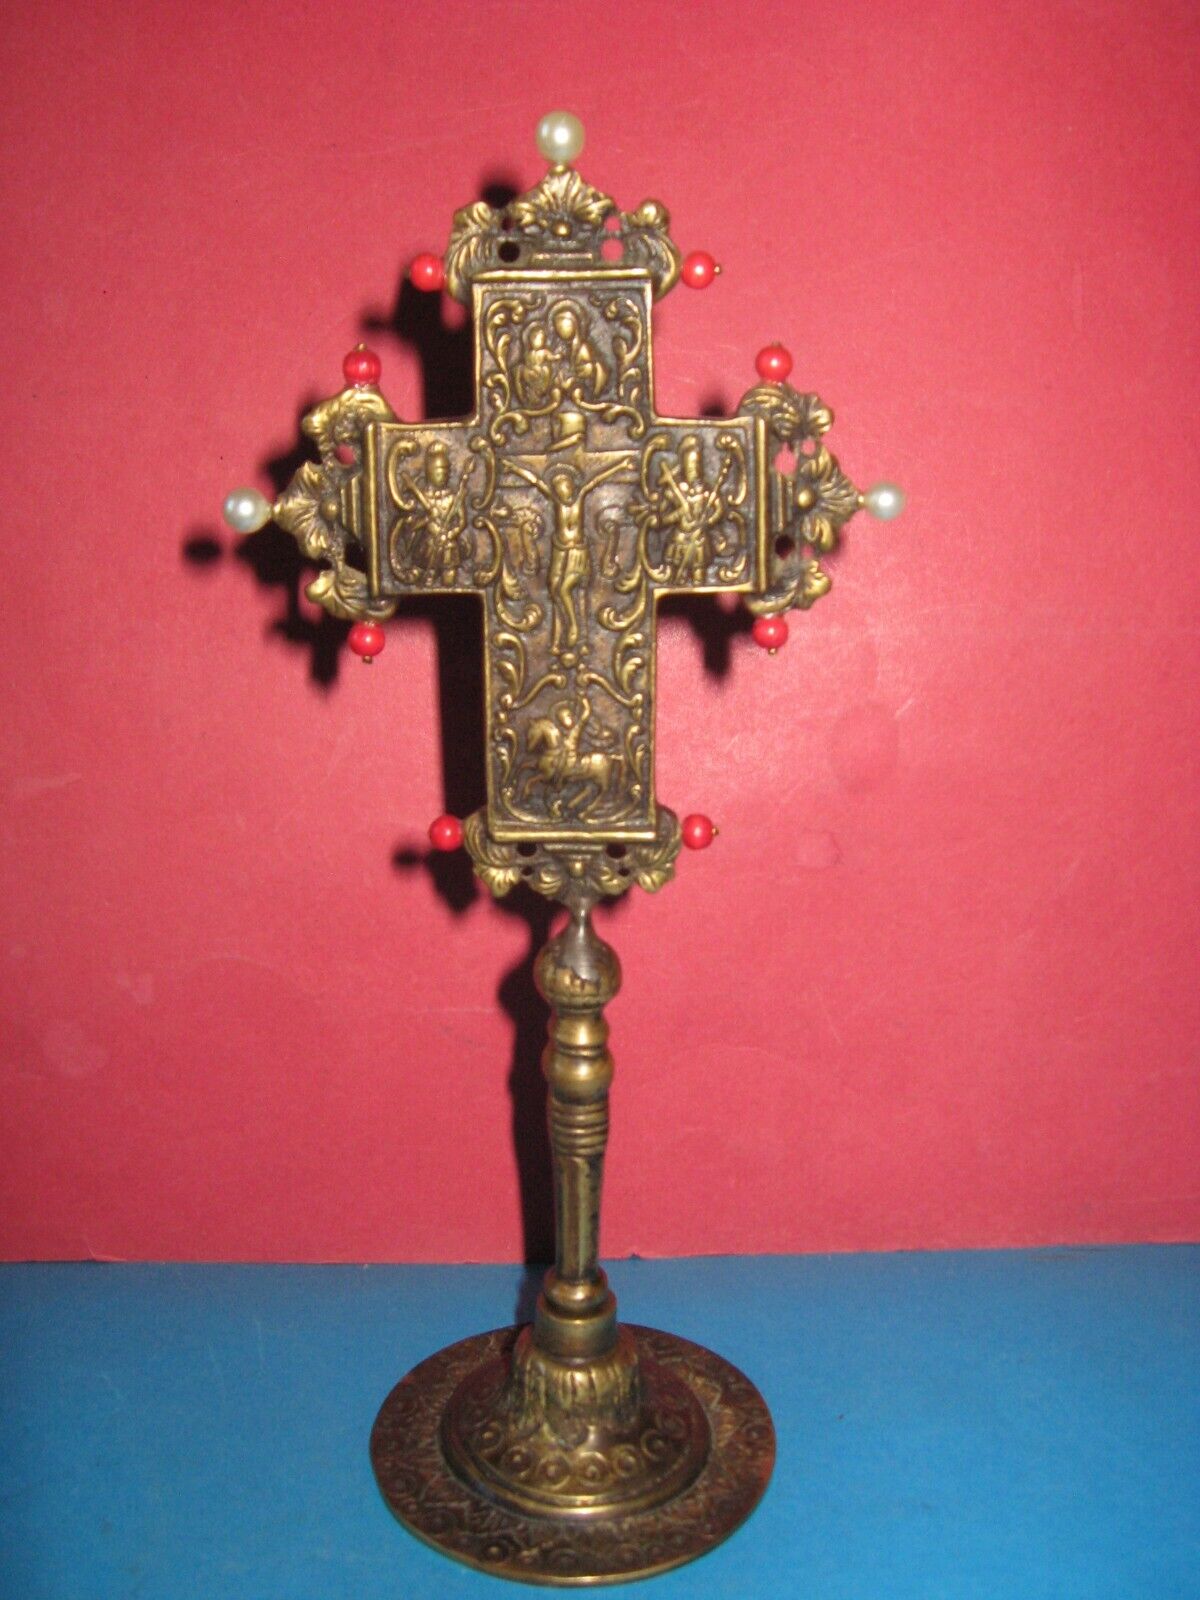 Magnificent Russian bronze cross, probably from the 19th century - VERY RARE